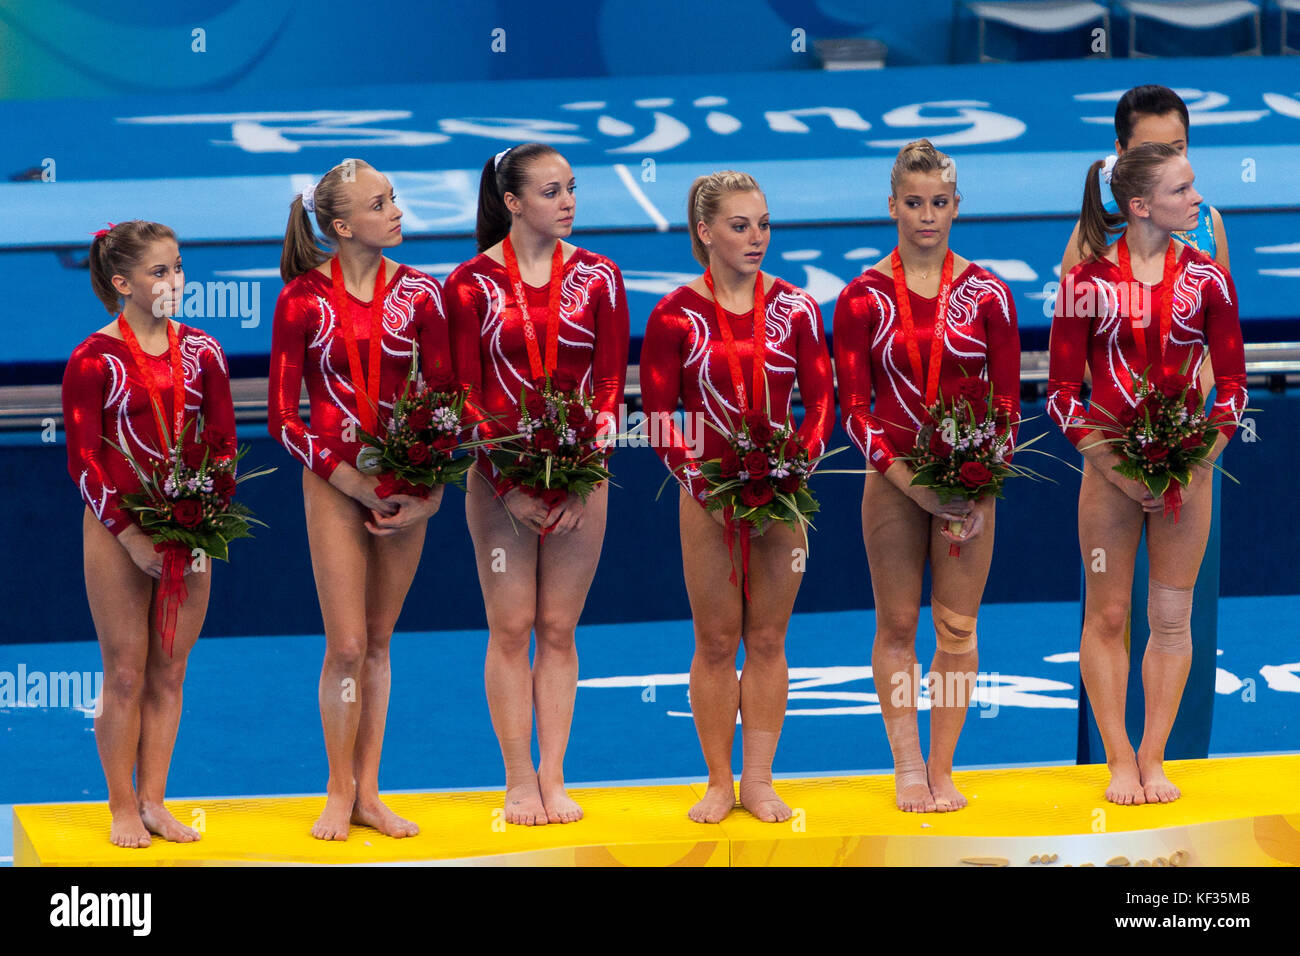 Team USA silver medal winners in the Women Artistic Gymnastic Team Event at the 2008 Olympic Summer Games, Beijing, China Stock Photo